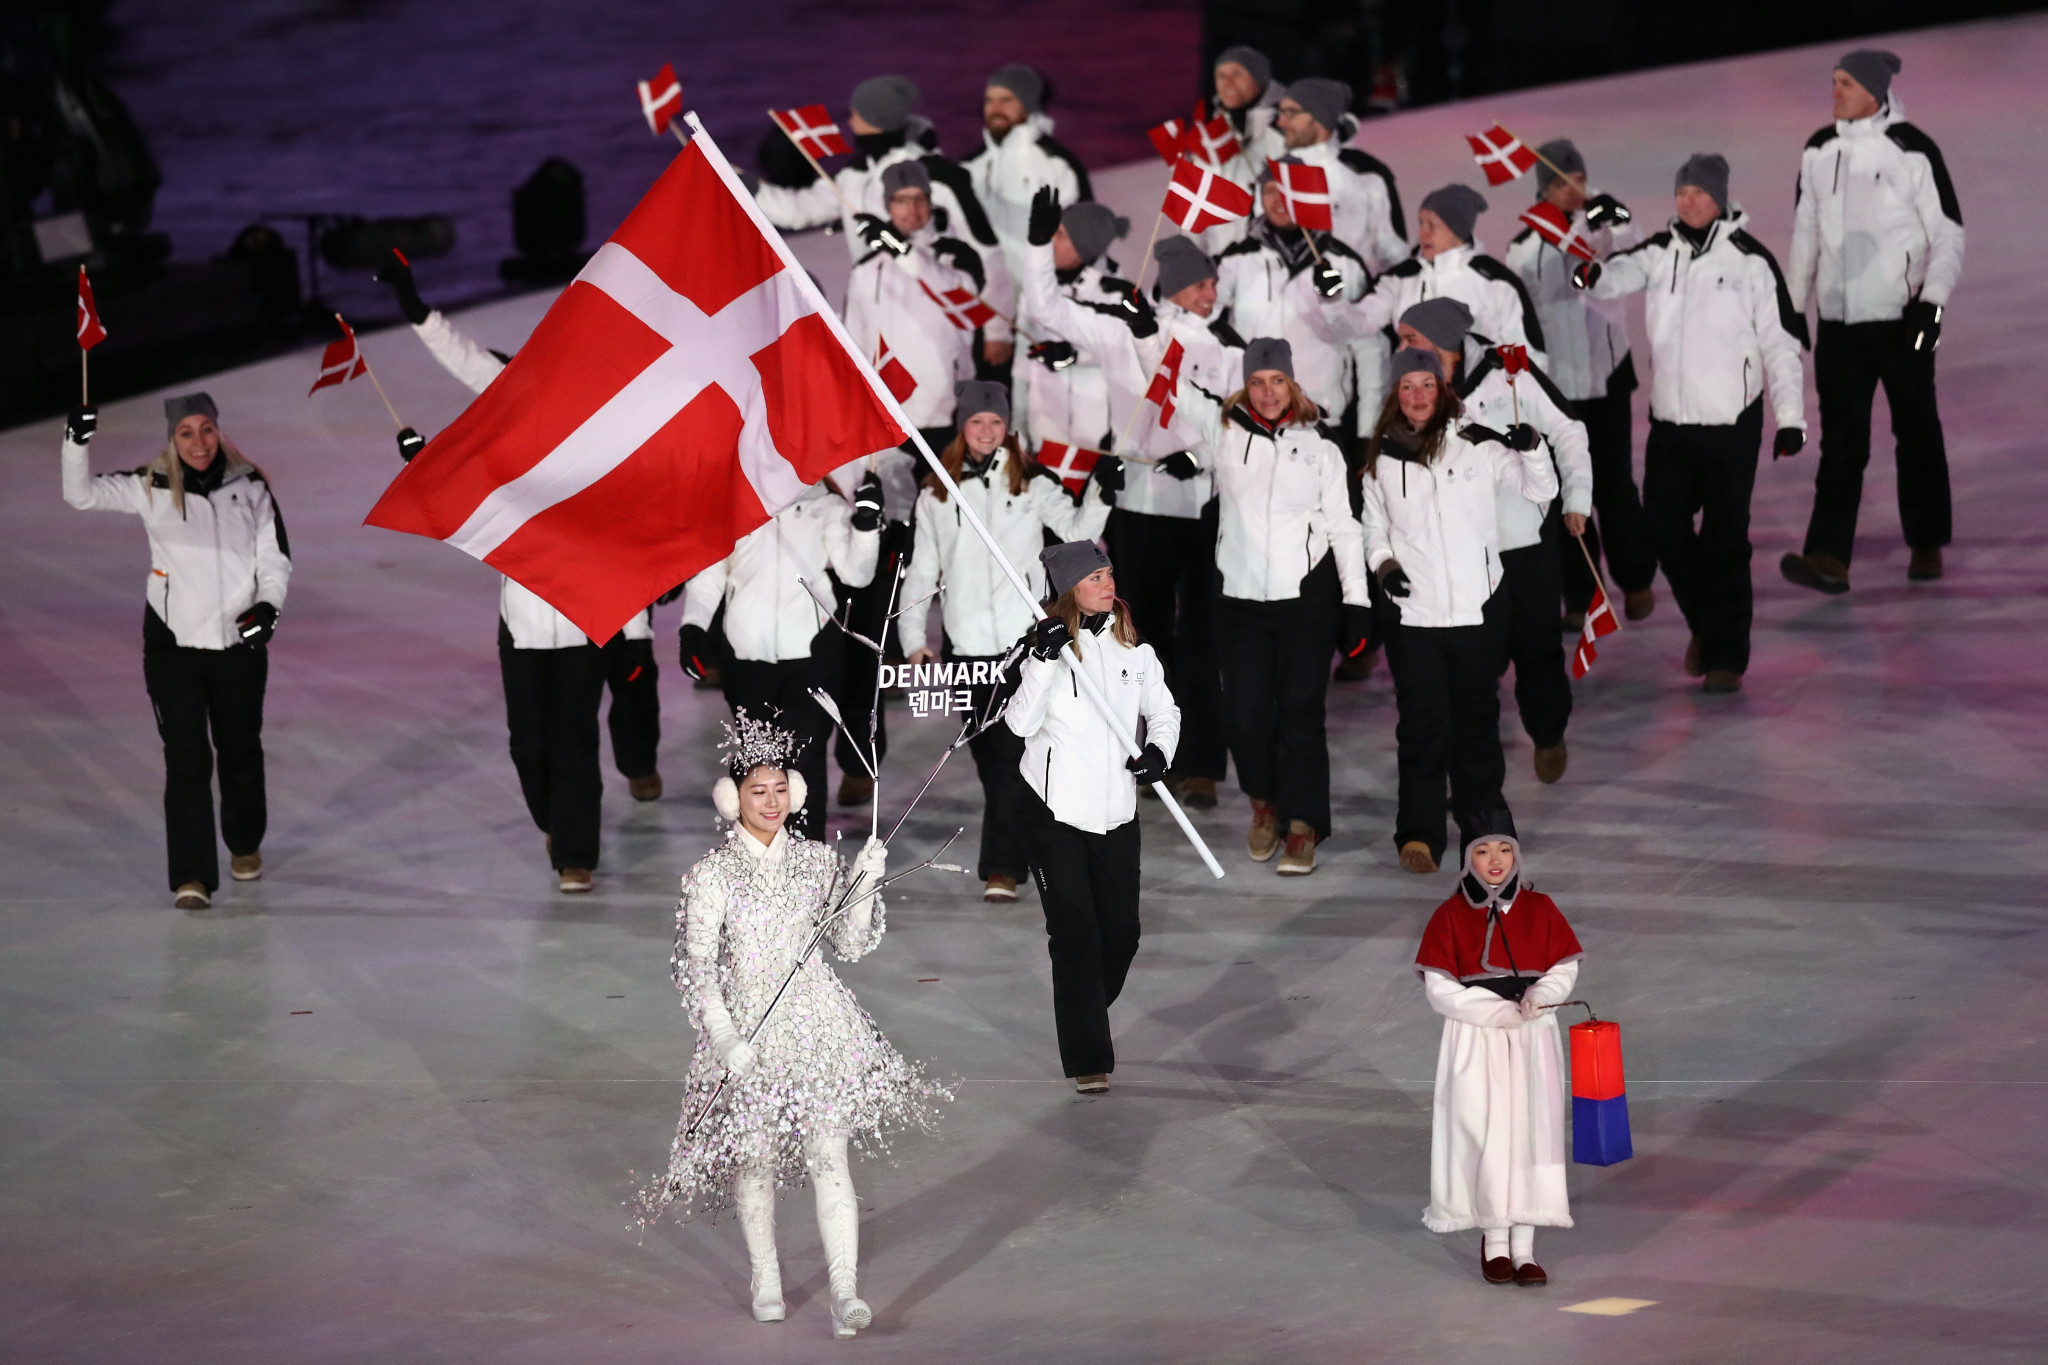 Danish athletes can still compete at Beijing 2022, but Government officials will boycott the Winter Olympics and Paralympics ©Getty Images